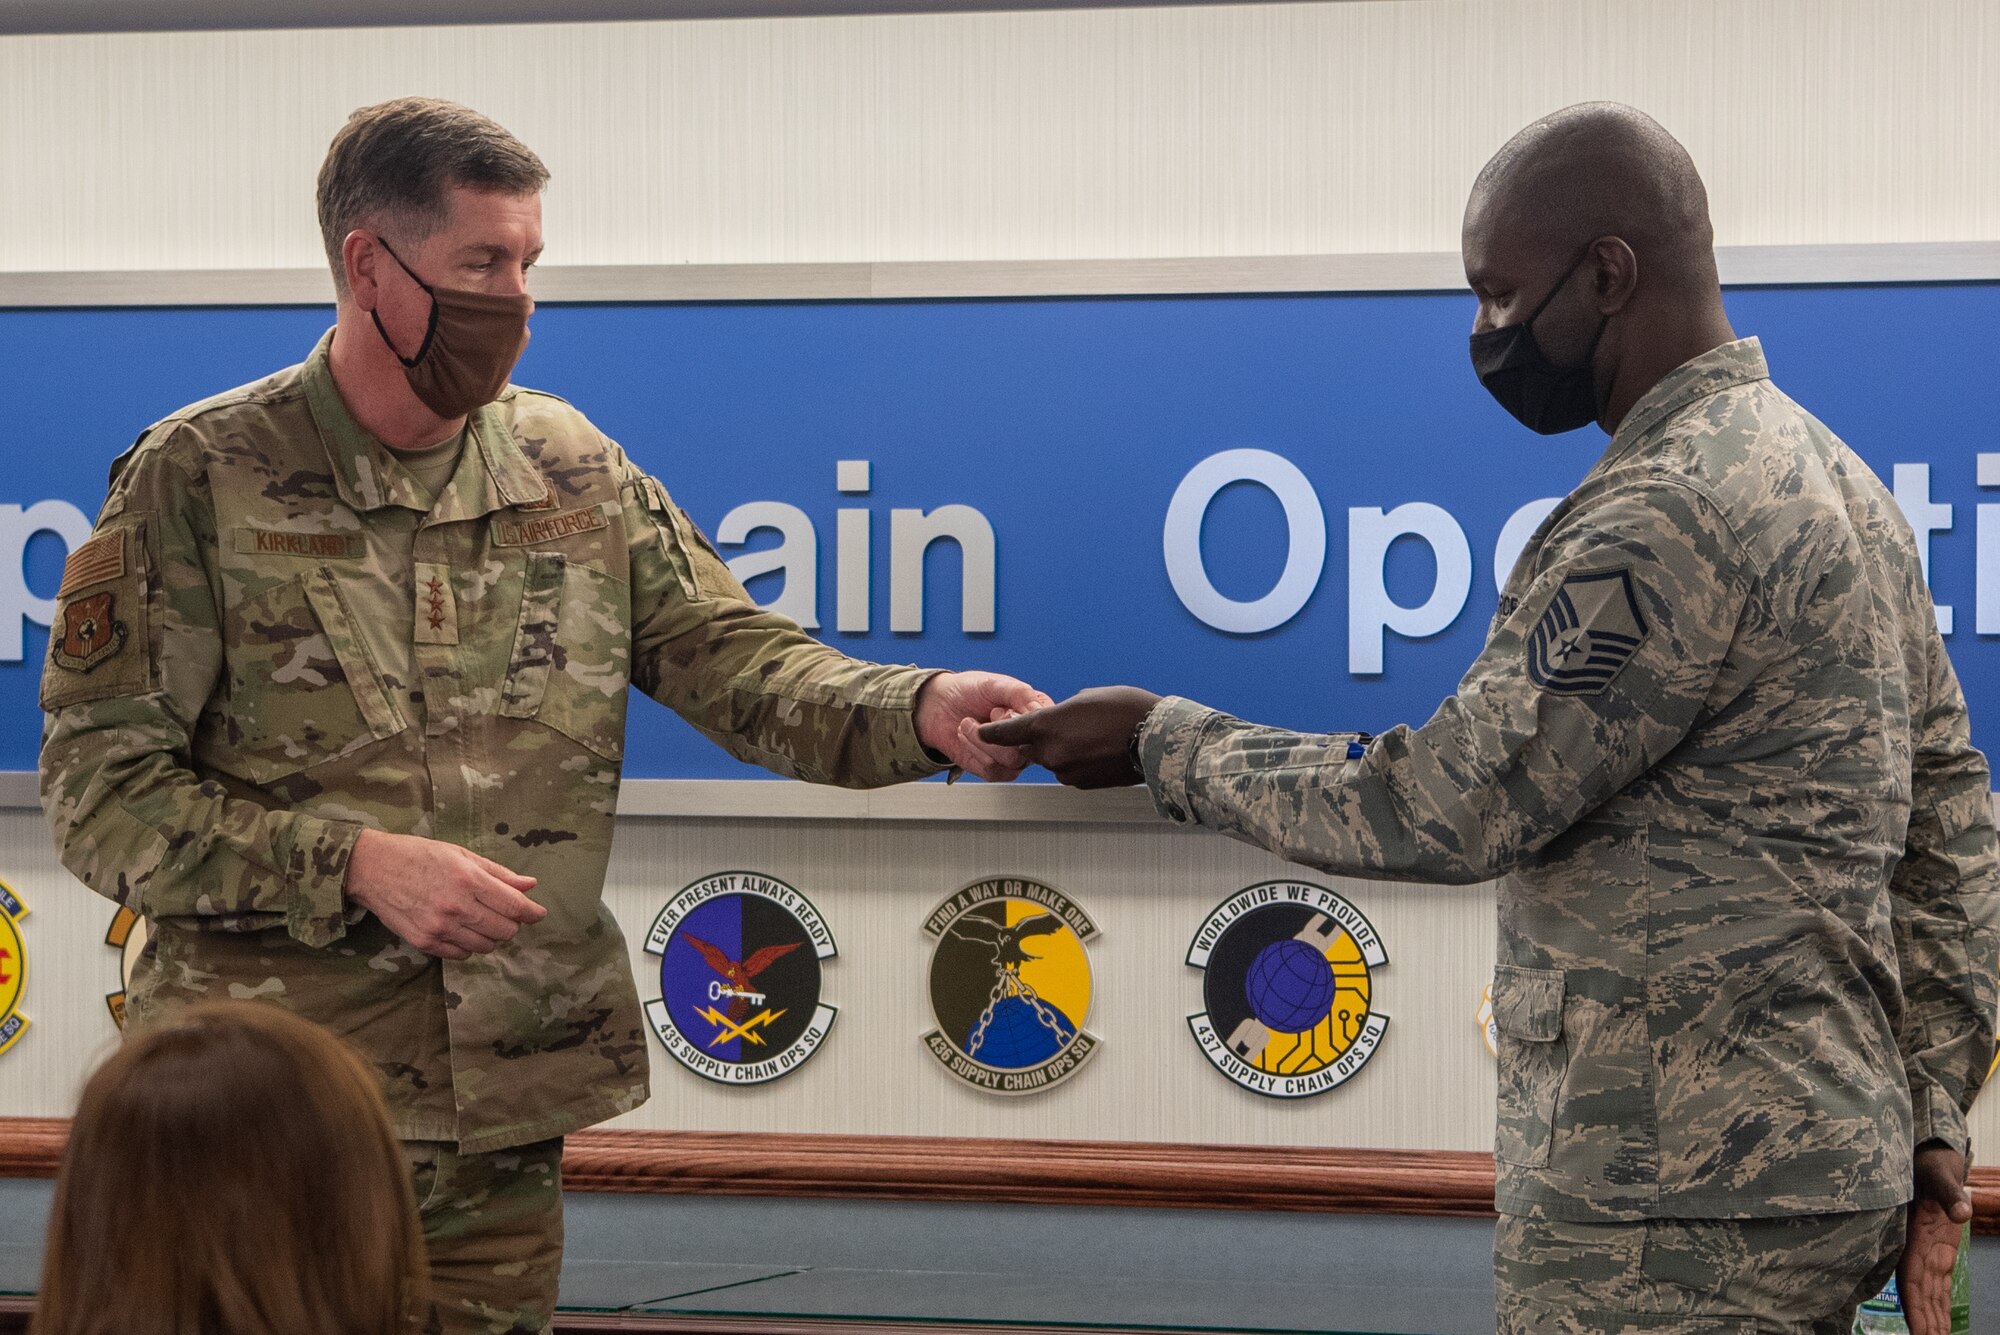 Master Sgt. Kweshi Raymond (Q), NCOIC C-130 Sustainment with the 436th Supply Chain Operations Squadron receives a coin from Air Force Lt. Gen. Gene Kirkland, Air Force Sustainment Center commander on Oct. 19.